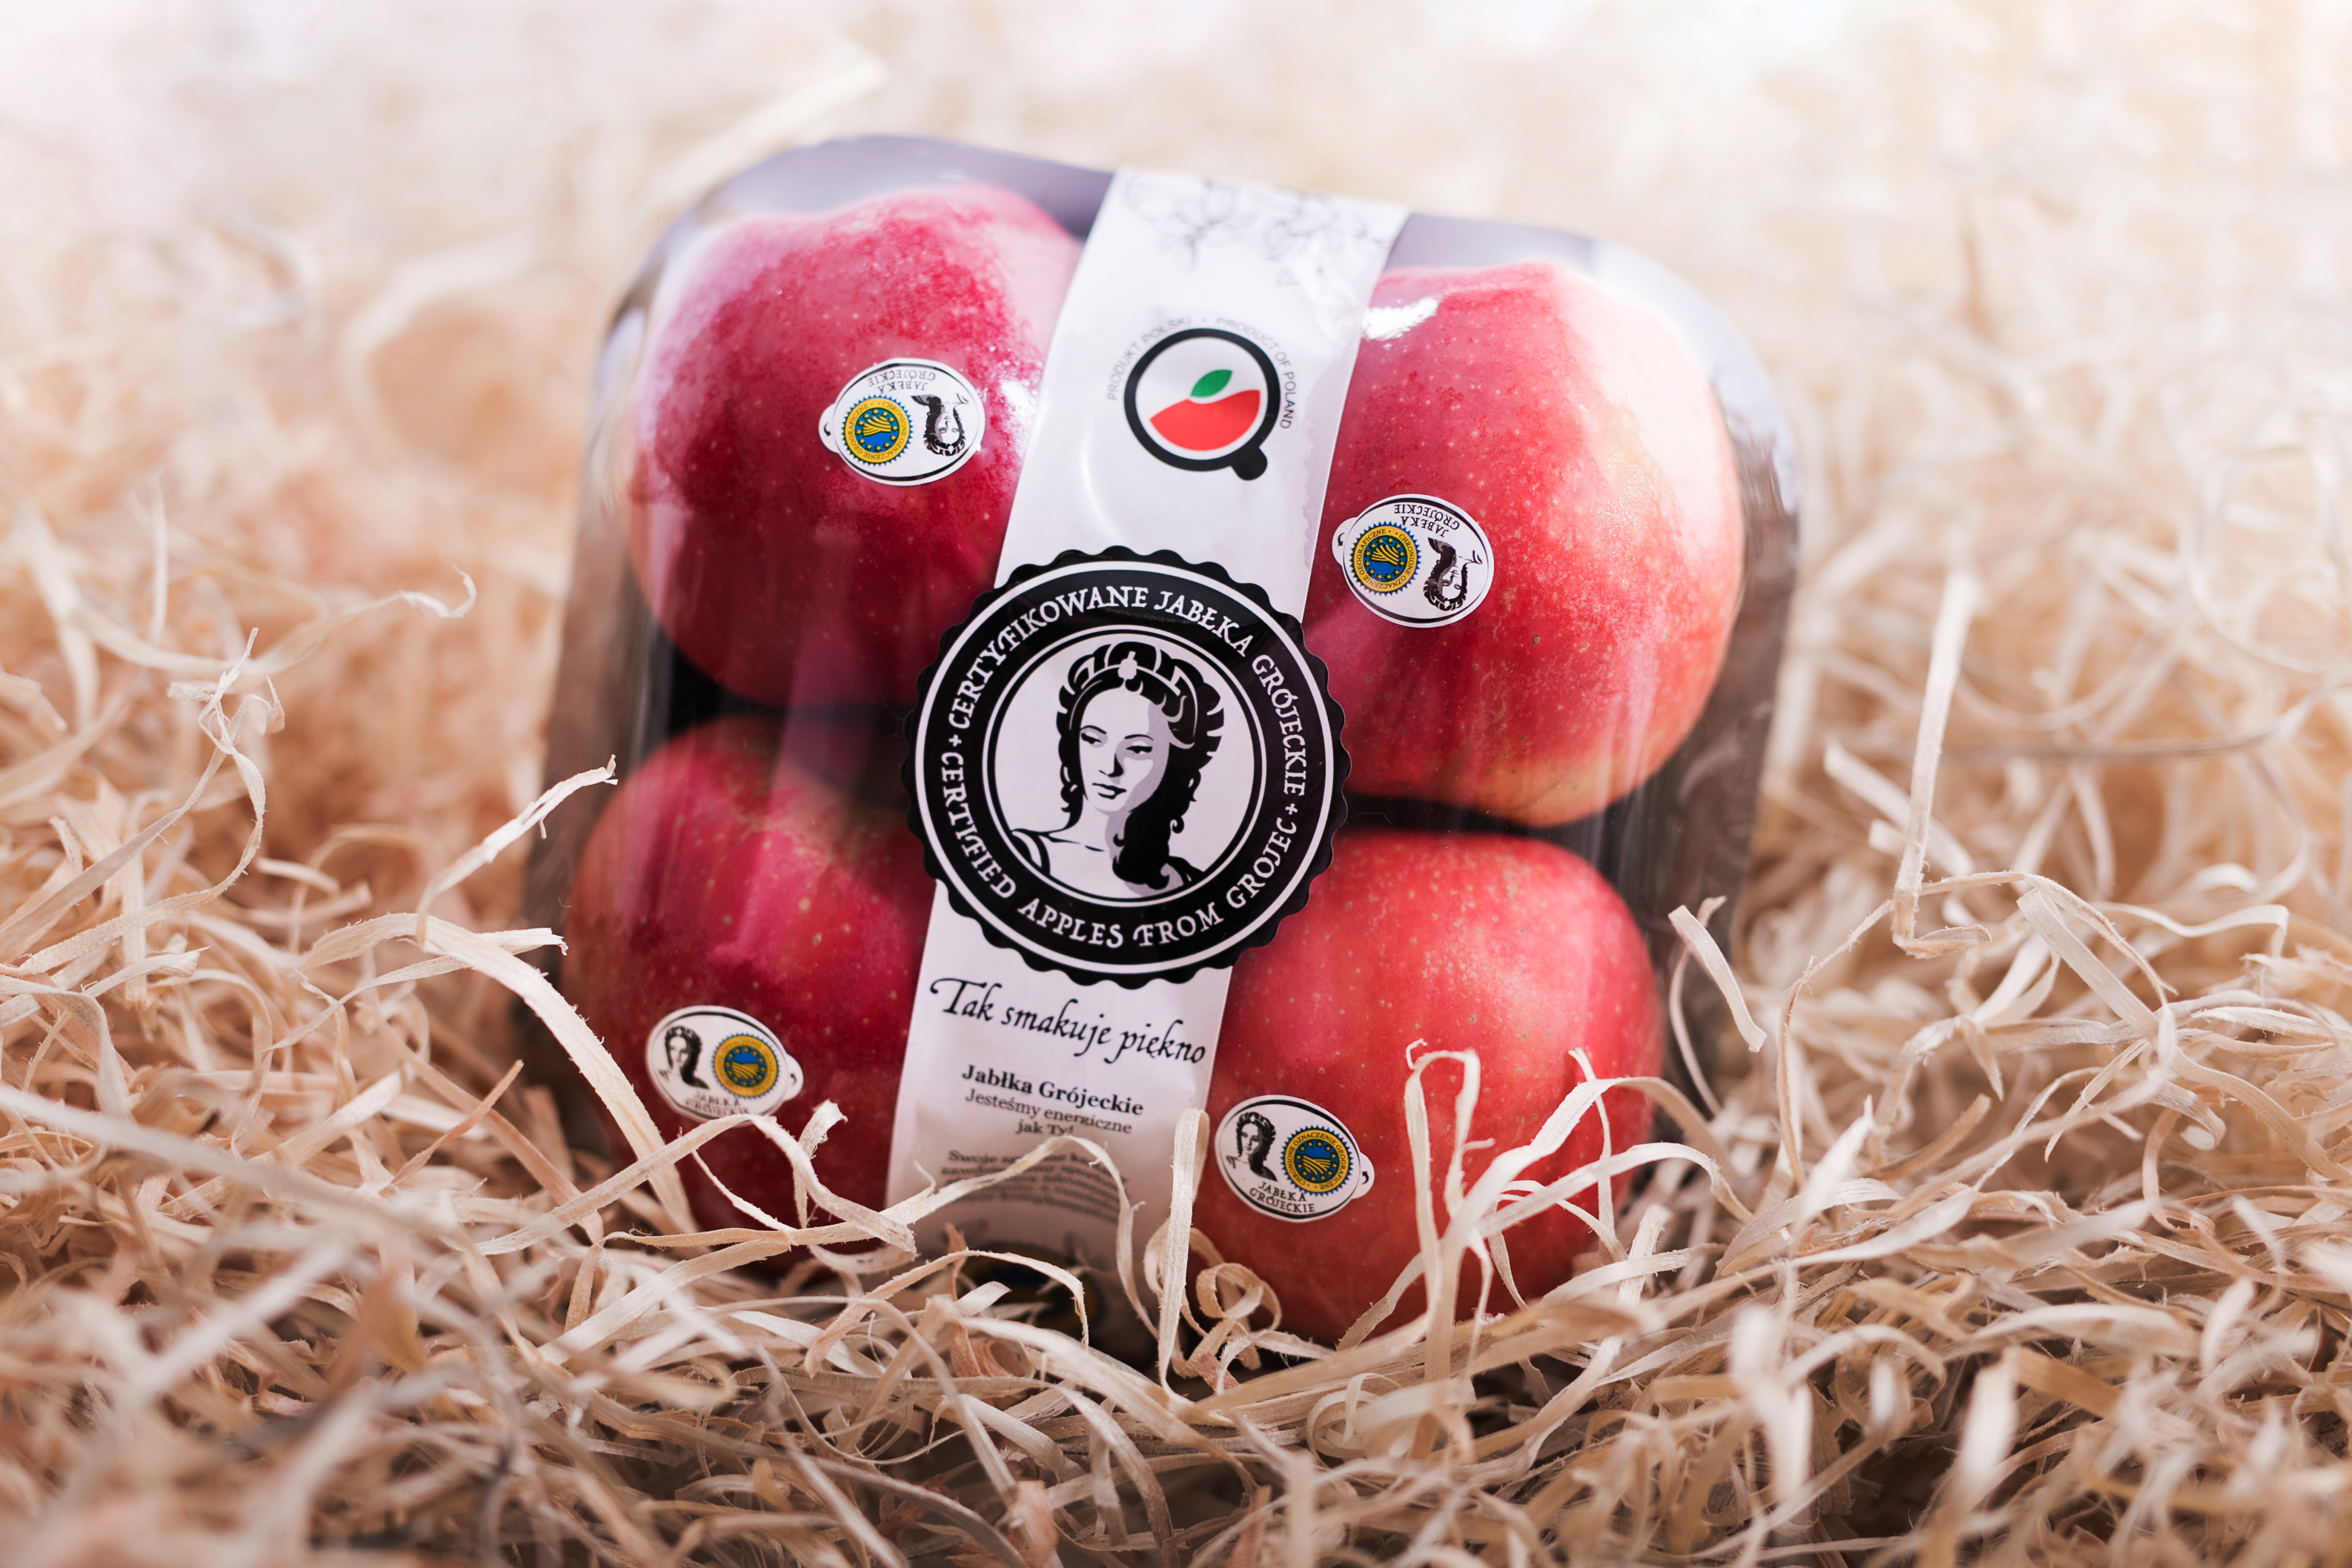 Imperial Fuji Apples from The Fruit Company